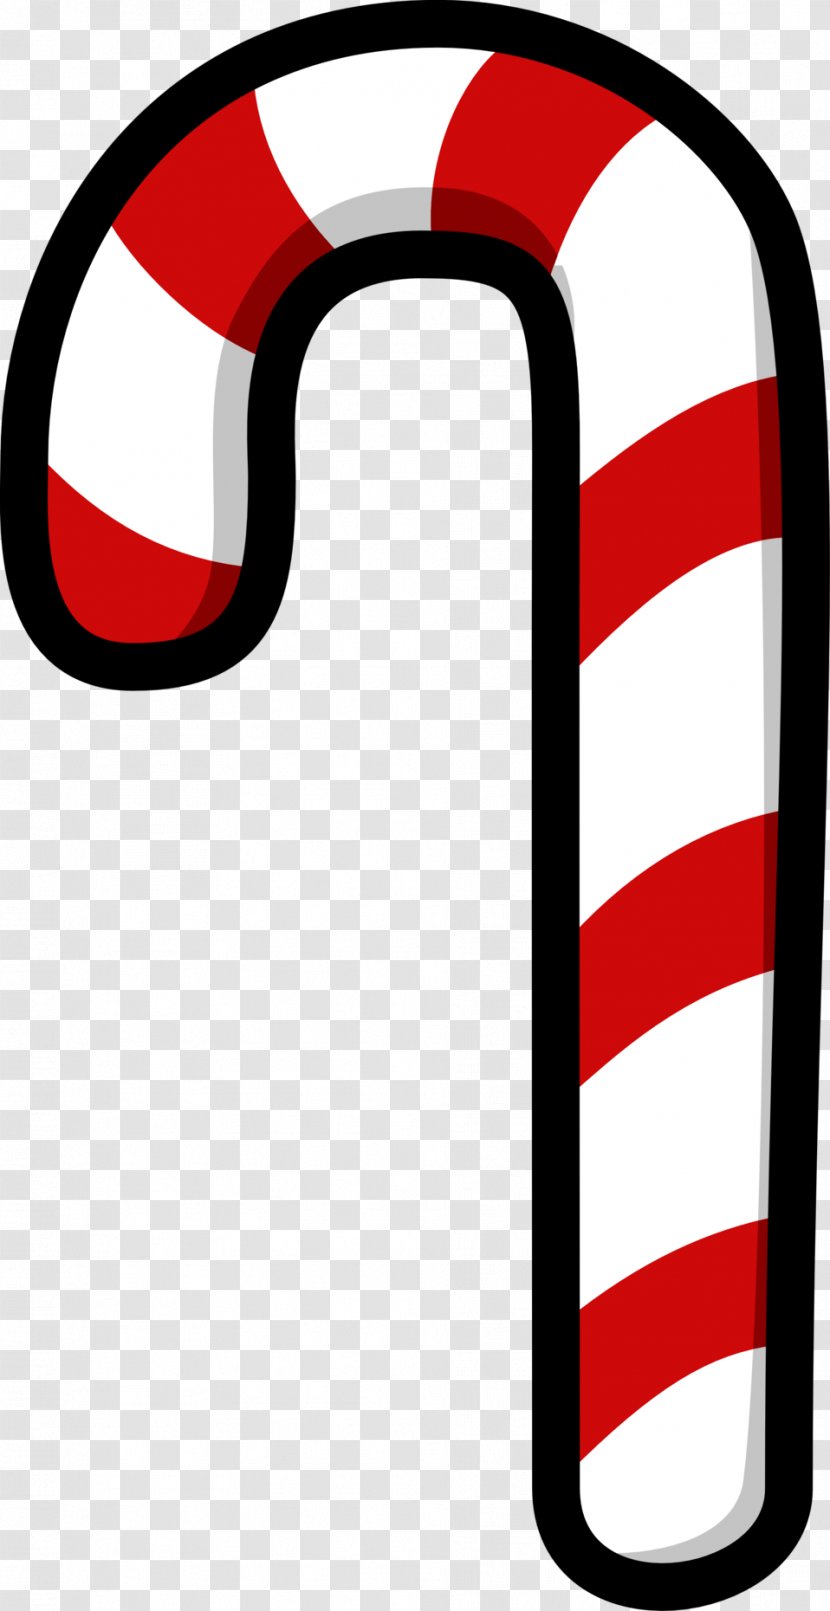 Candy Cane Gingerbread House Clip Art - Public Domain - String Lights Transparent PNG